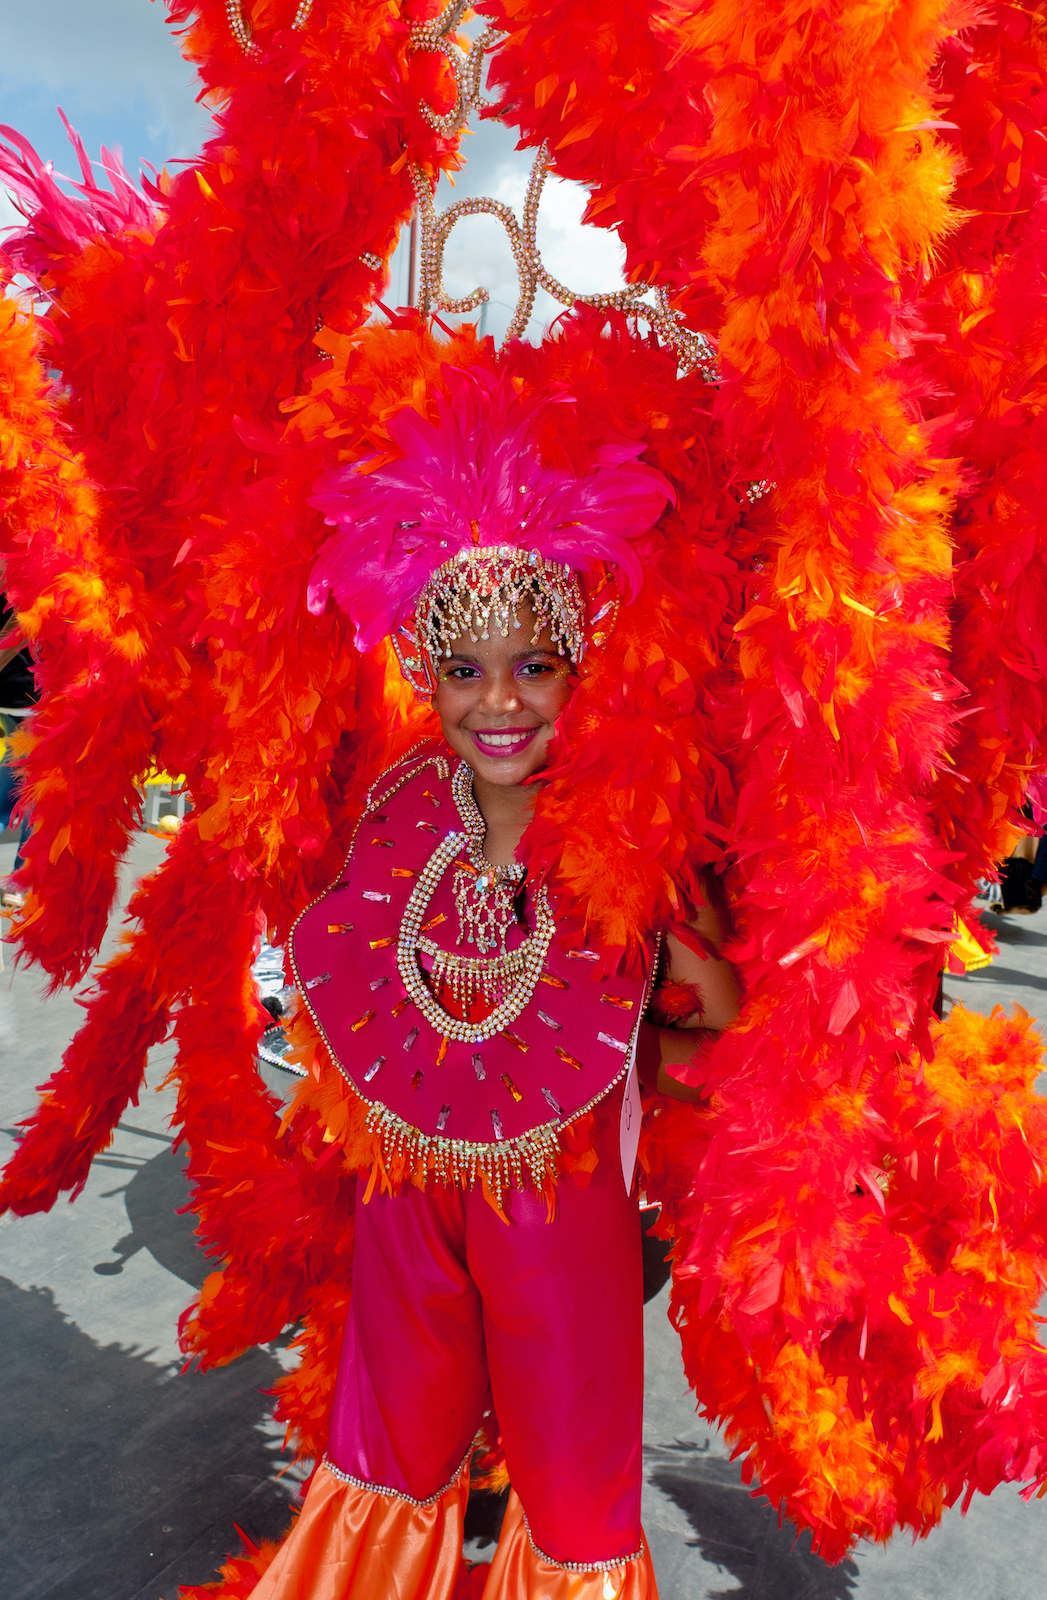 Trinidad Carnival is the Greatest Show on Earth! Here's Why.